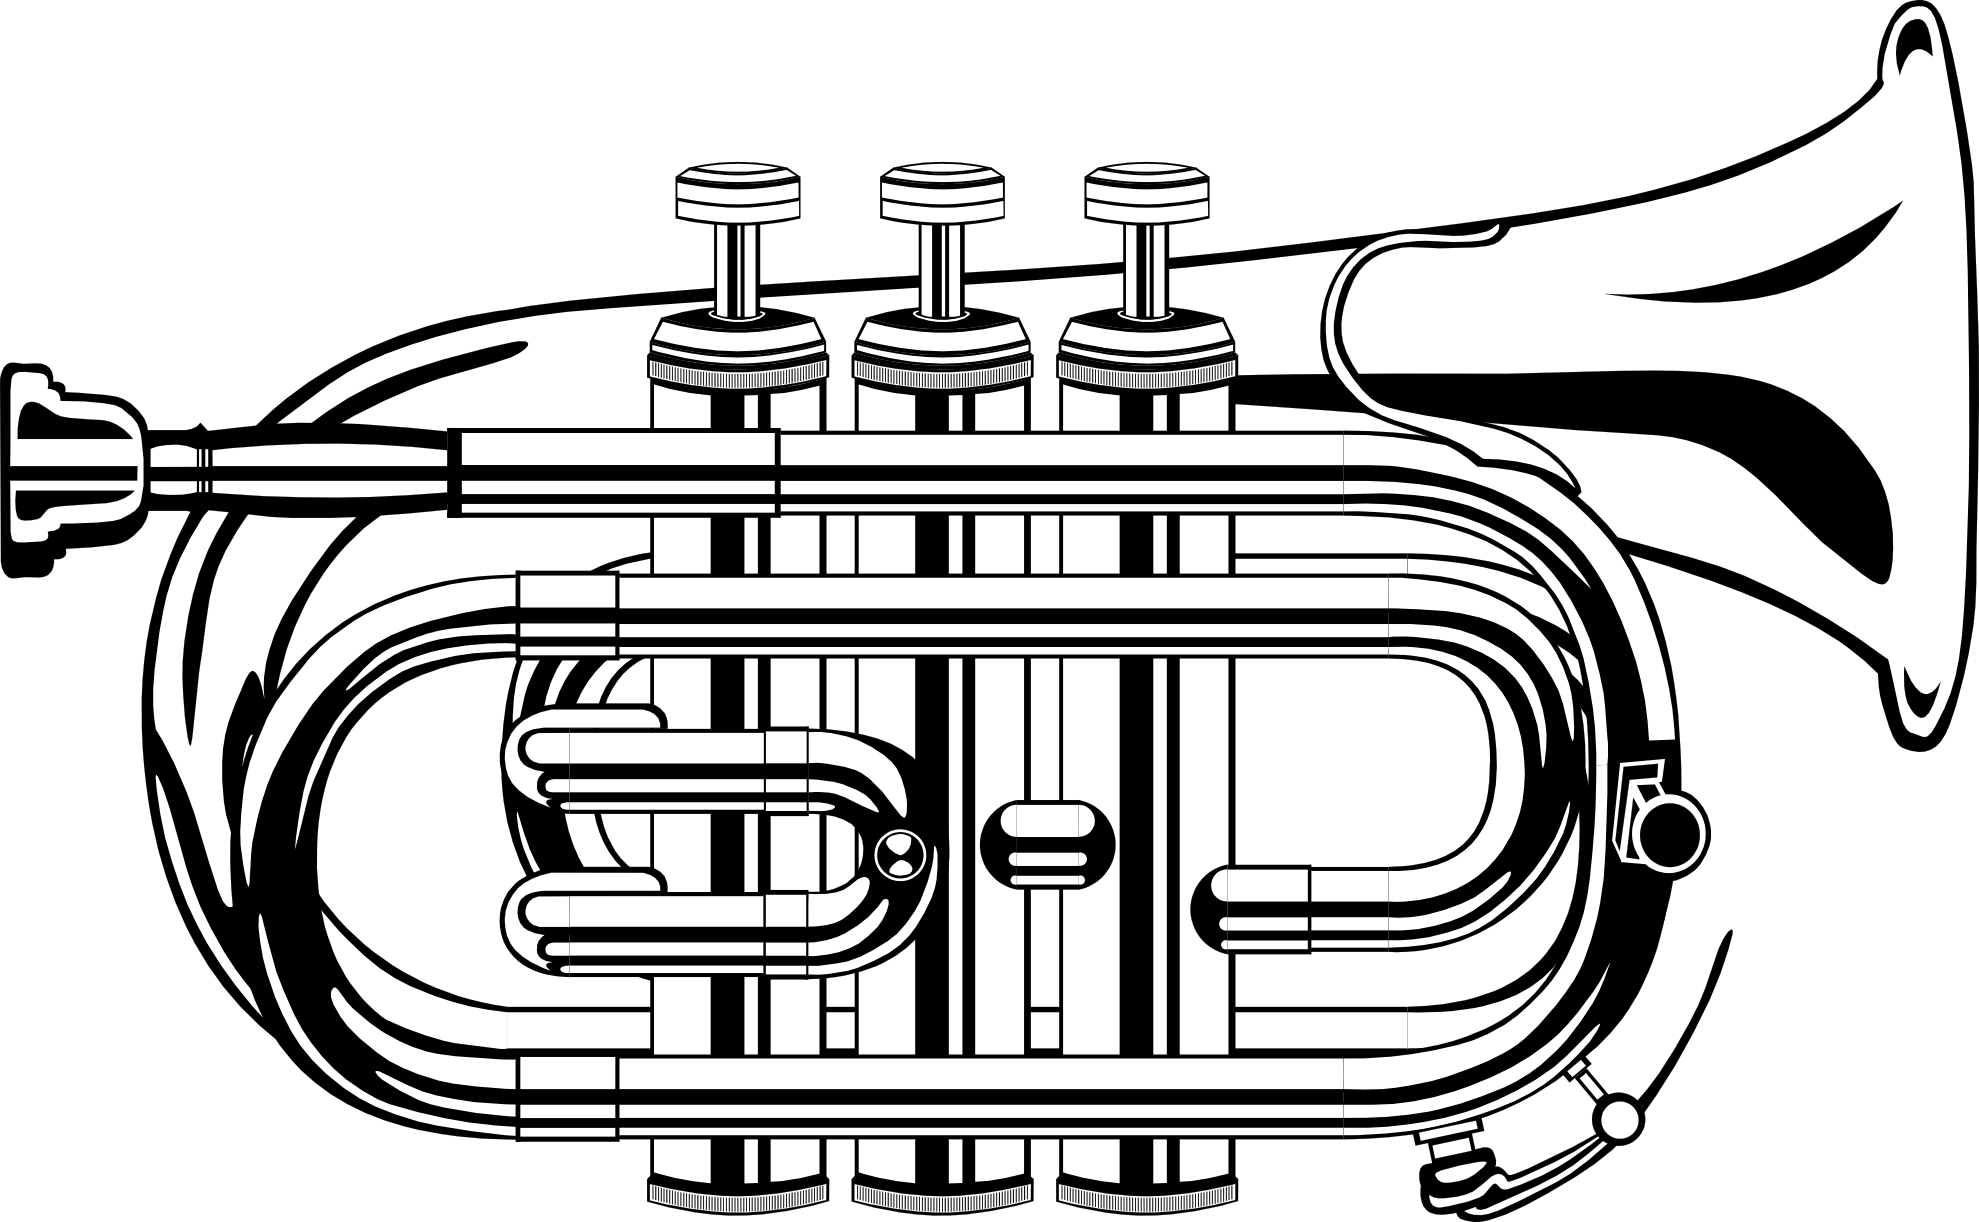 Trumpet Clip Art Black And White   Clipart Panda   Free Clipart Images